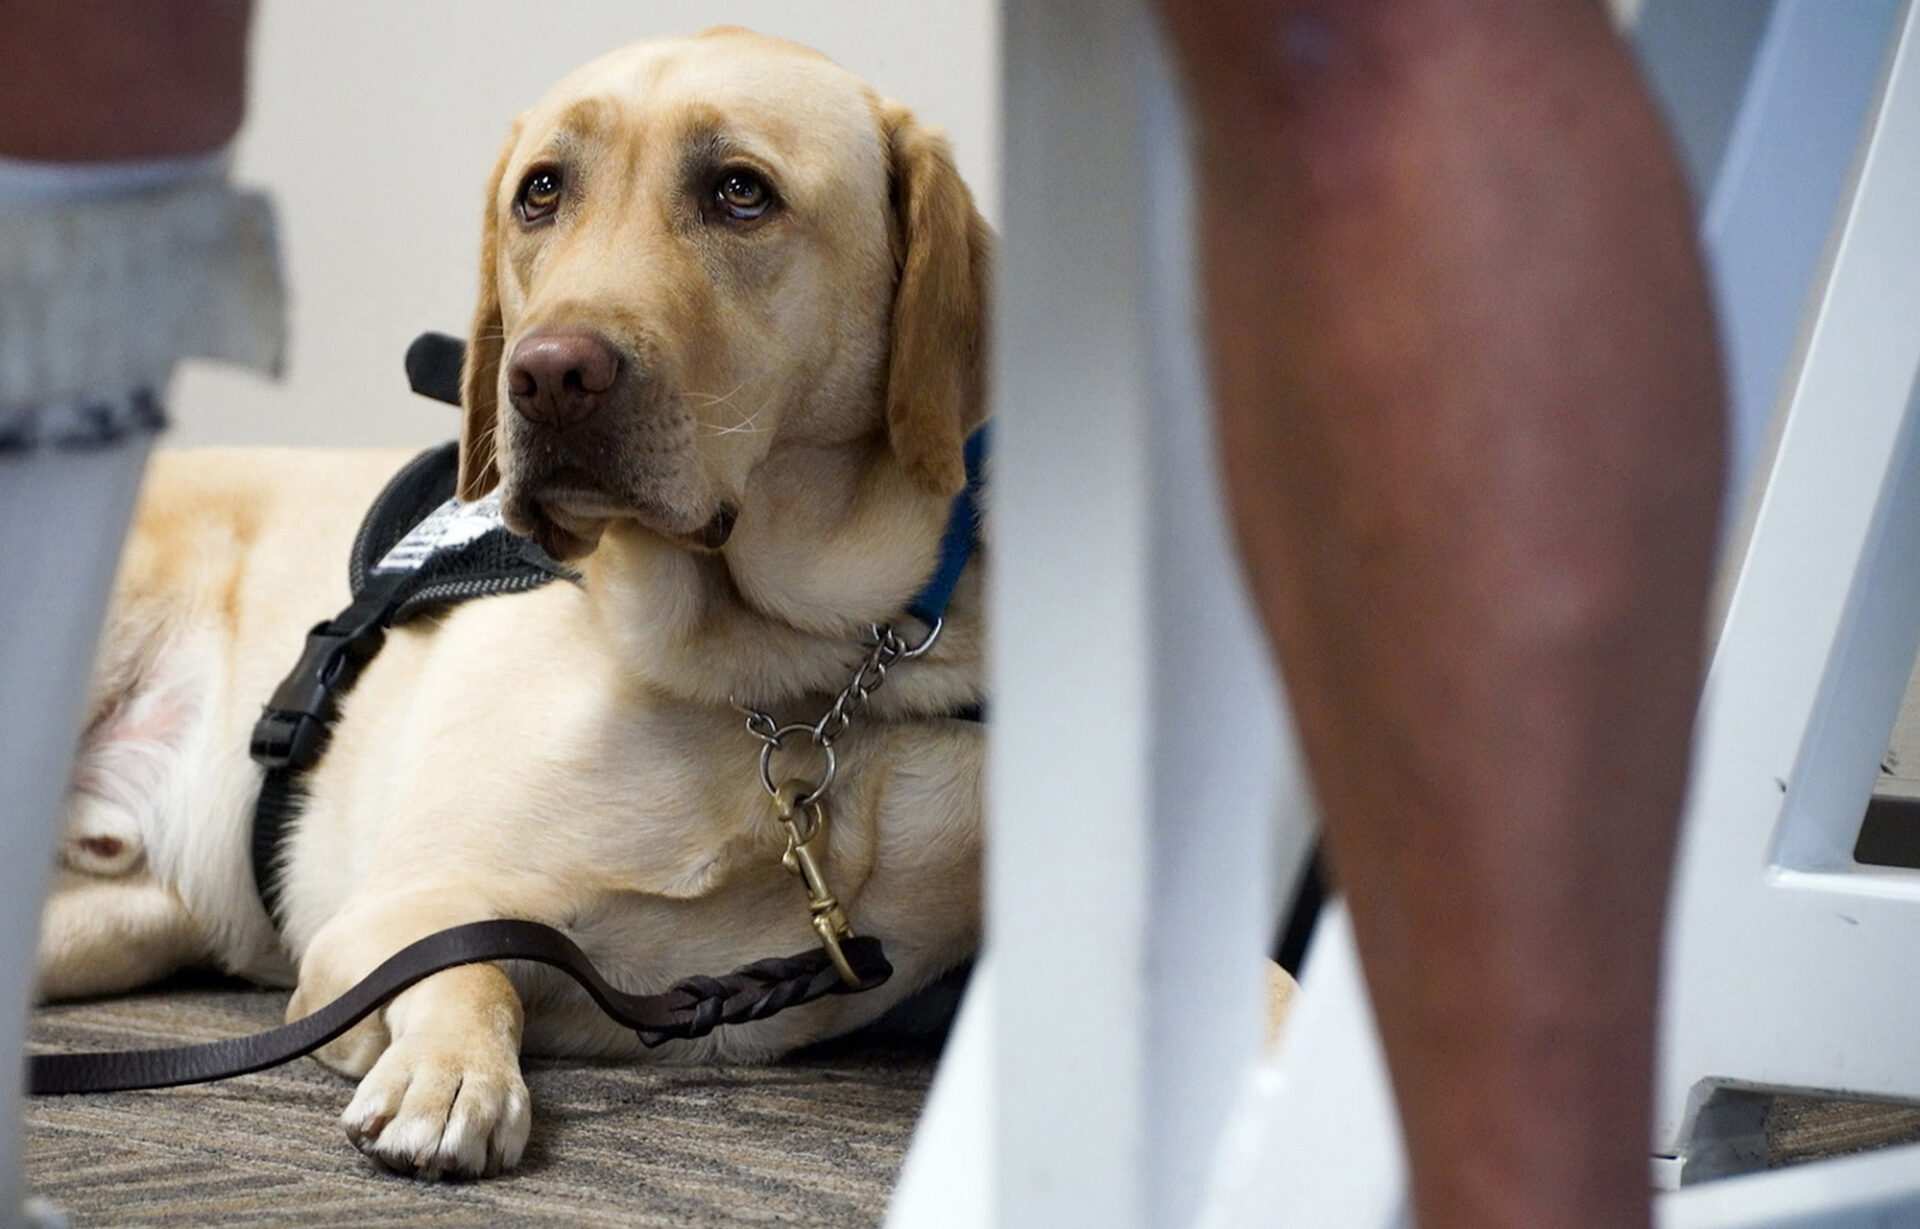 States struggle to curb fake emotional support animals